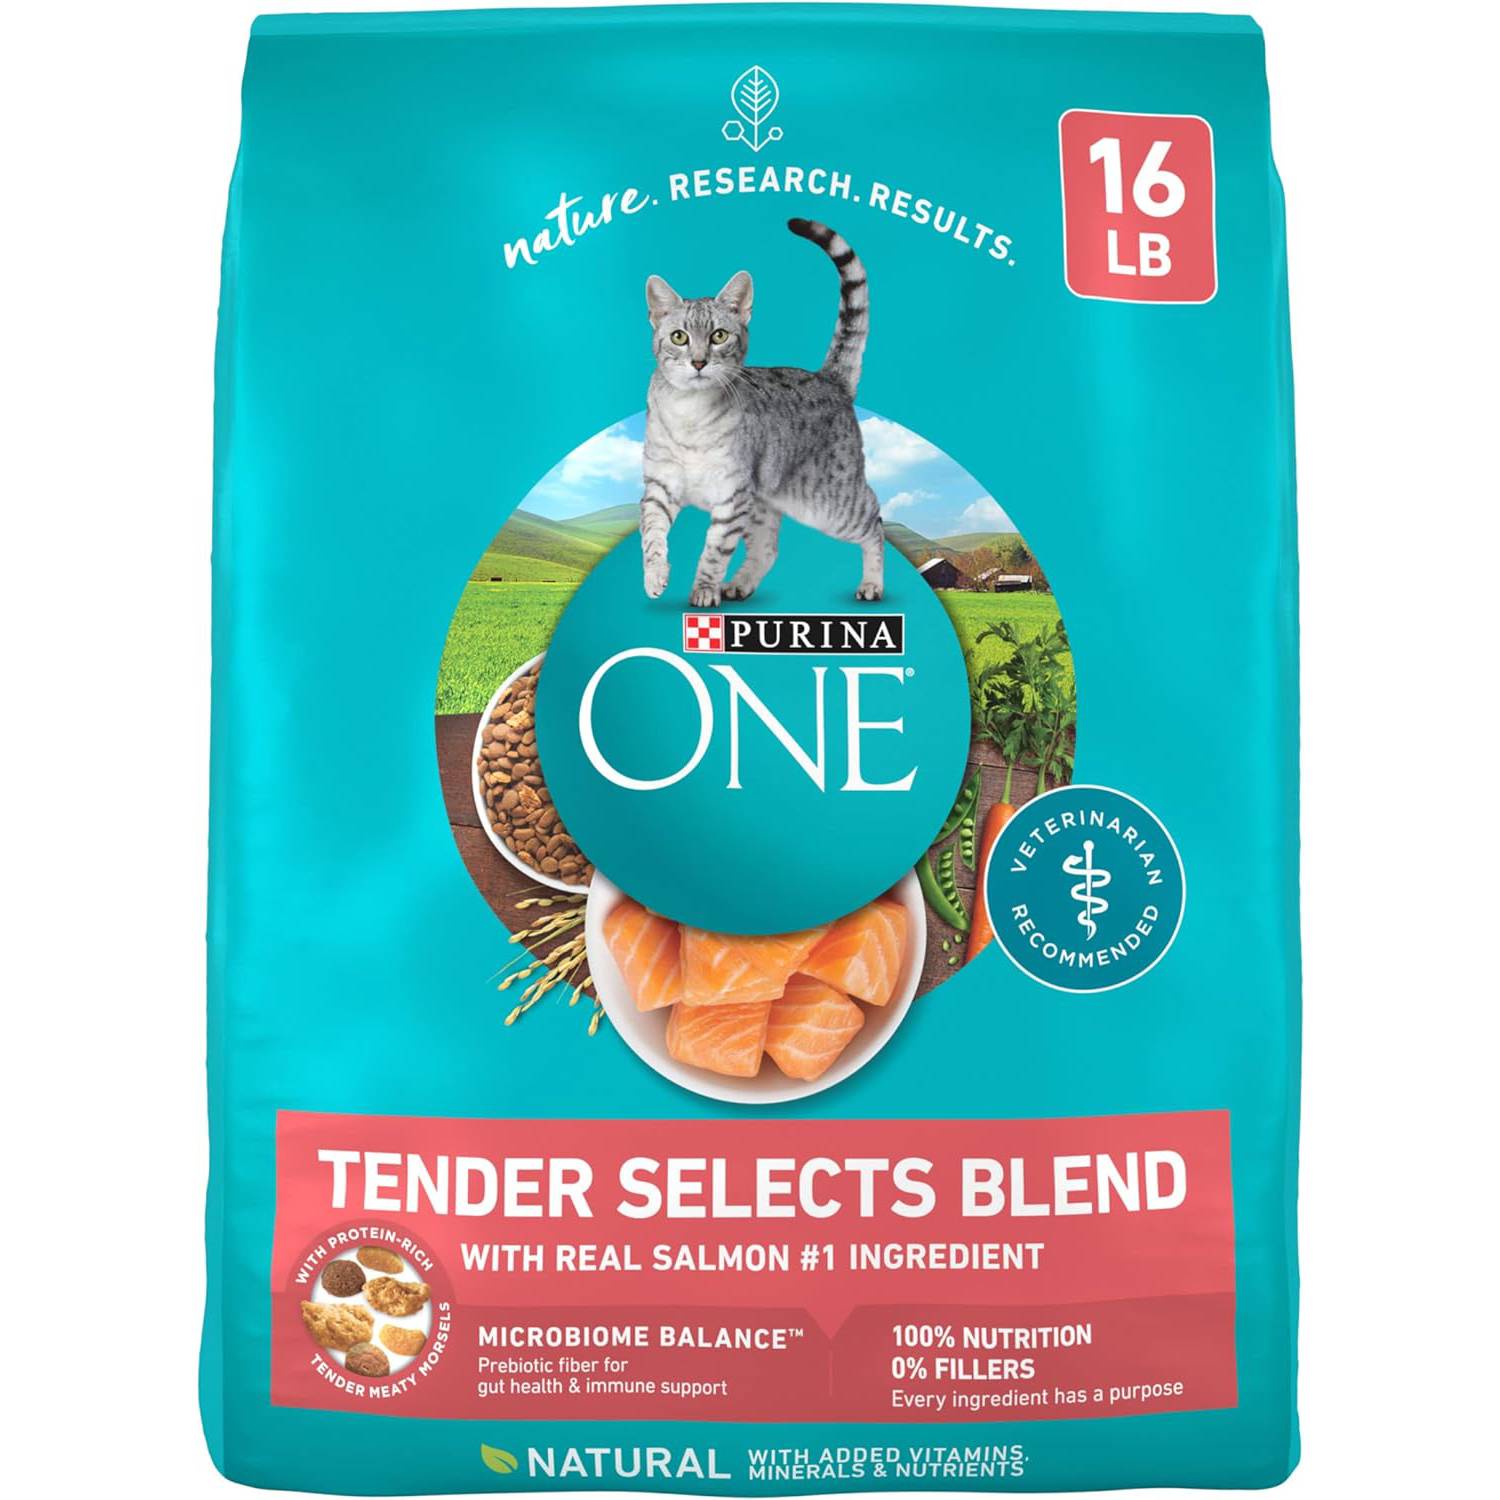 Purina ONE Tender Selects Blend Dry Cat Food